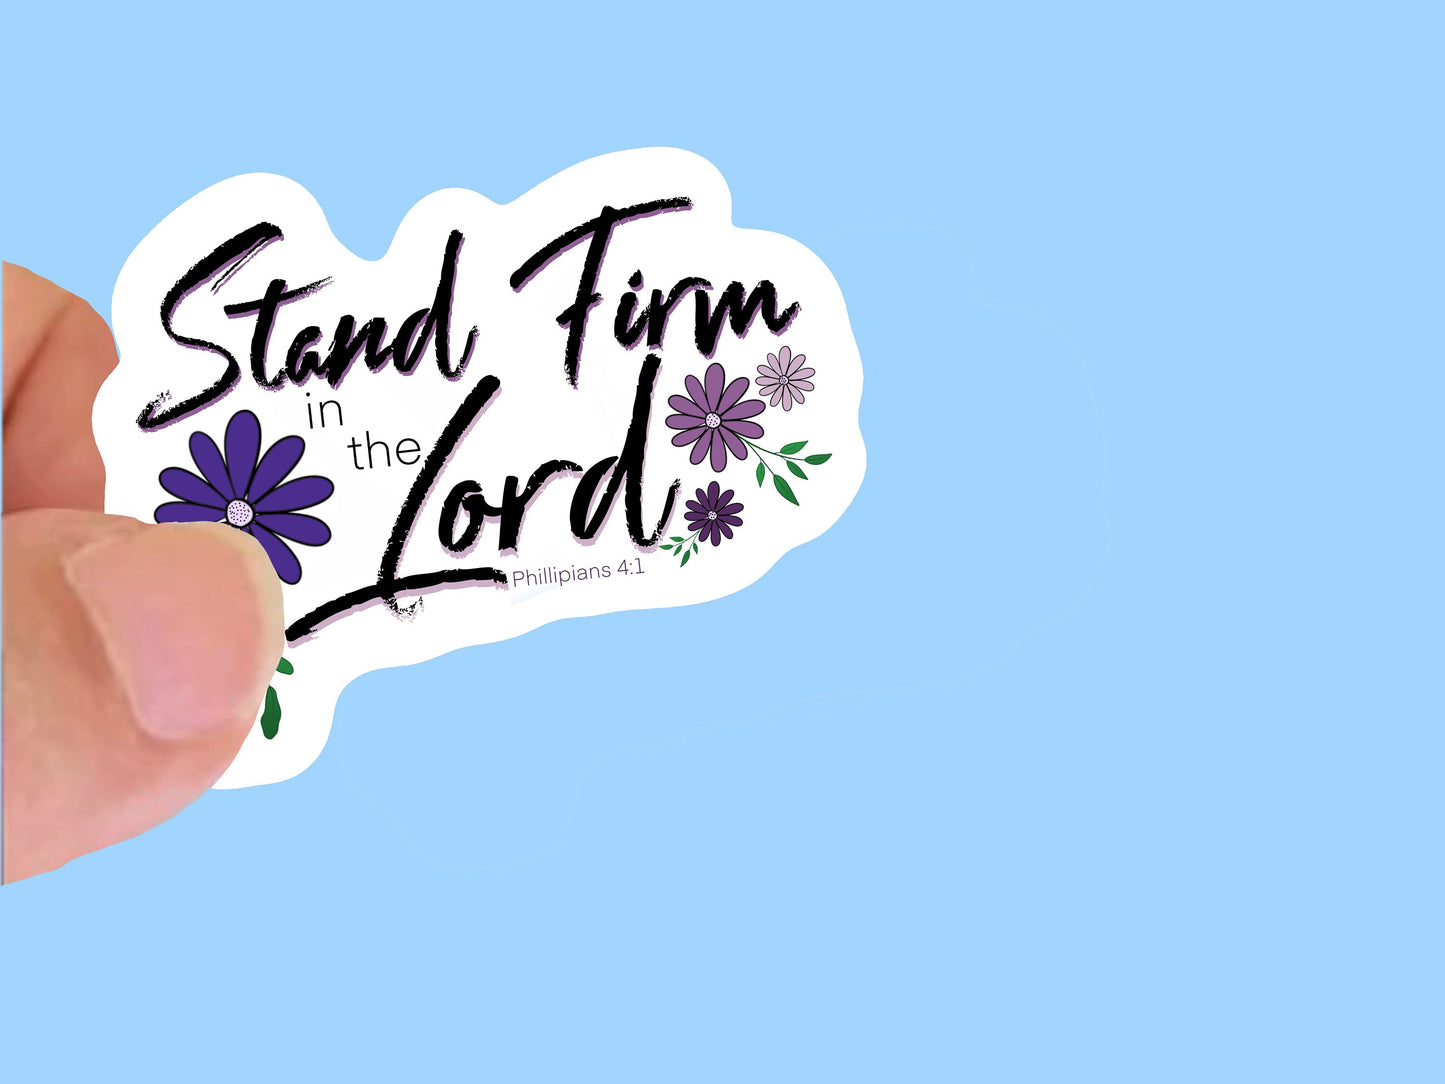 Stand firm in the Lord, Christian Faith UV/ Waterproof Vinyl Sticker/ Decal- Choice of Size, Single or Bulk qty